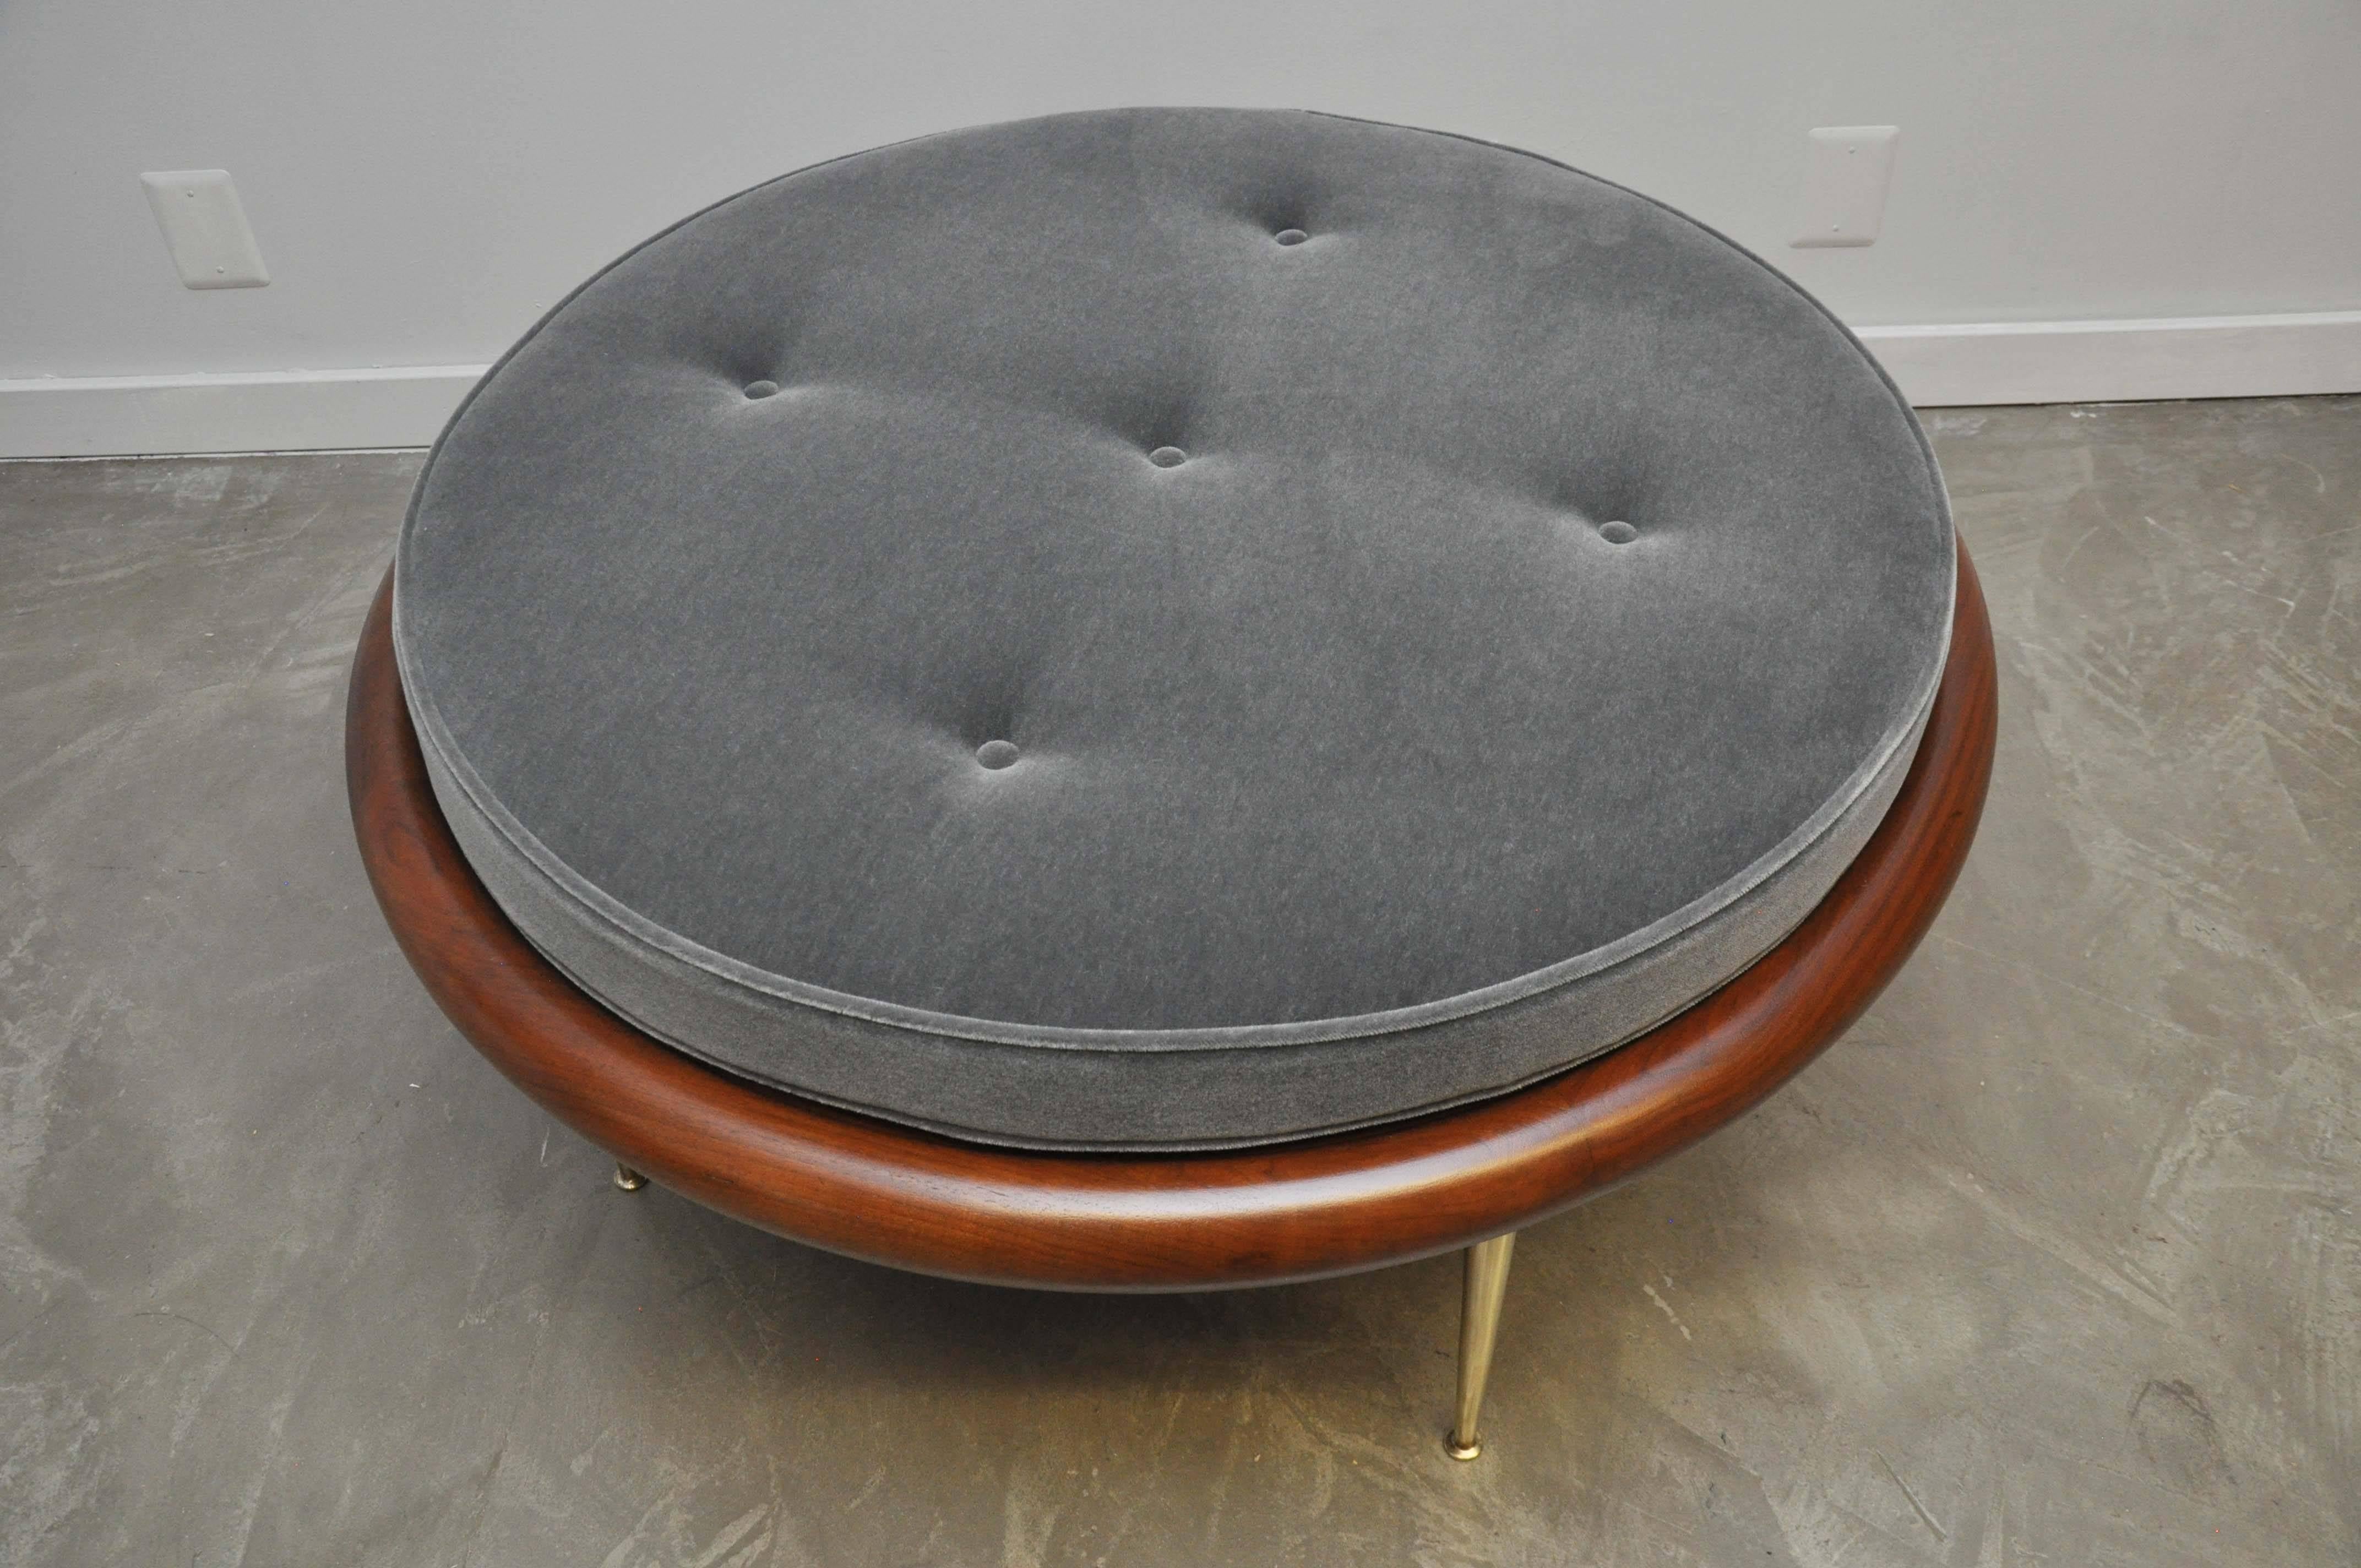 Rare brass leg pouf by T.H. Robsjohn-Gibbings. Versatile piece doubles as coffee table. Fully restored. Refinished Walnut base with high polish brass legs. New mohair cushion. Early model 1745. 20